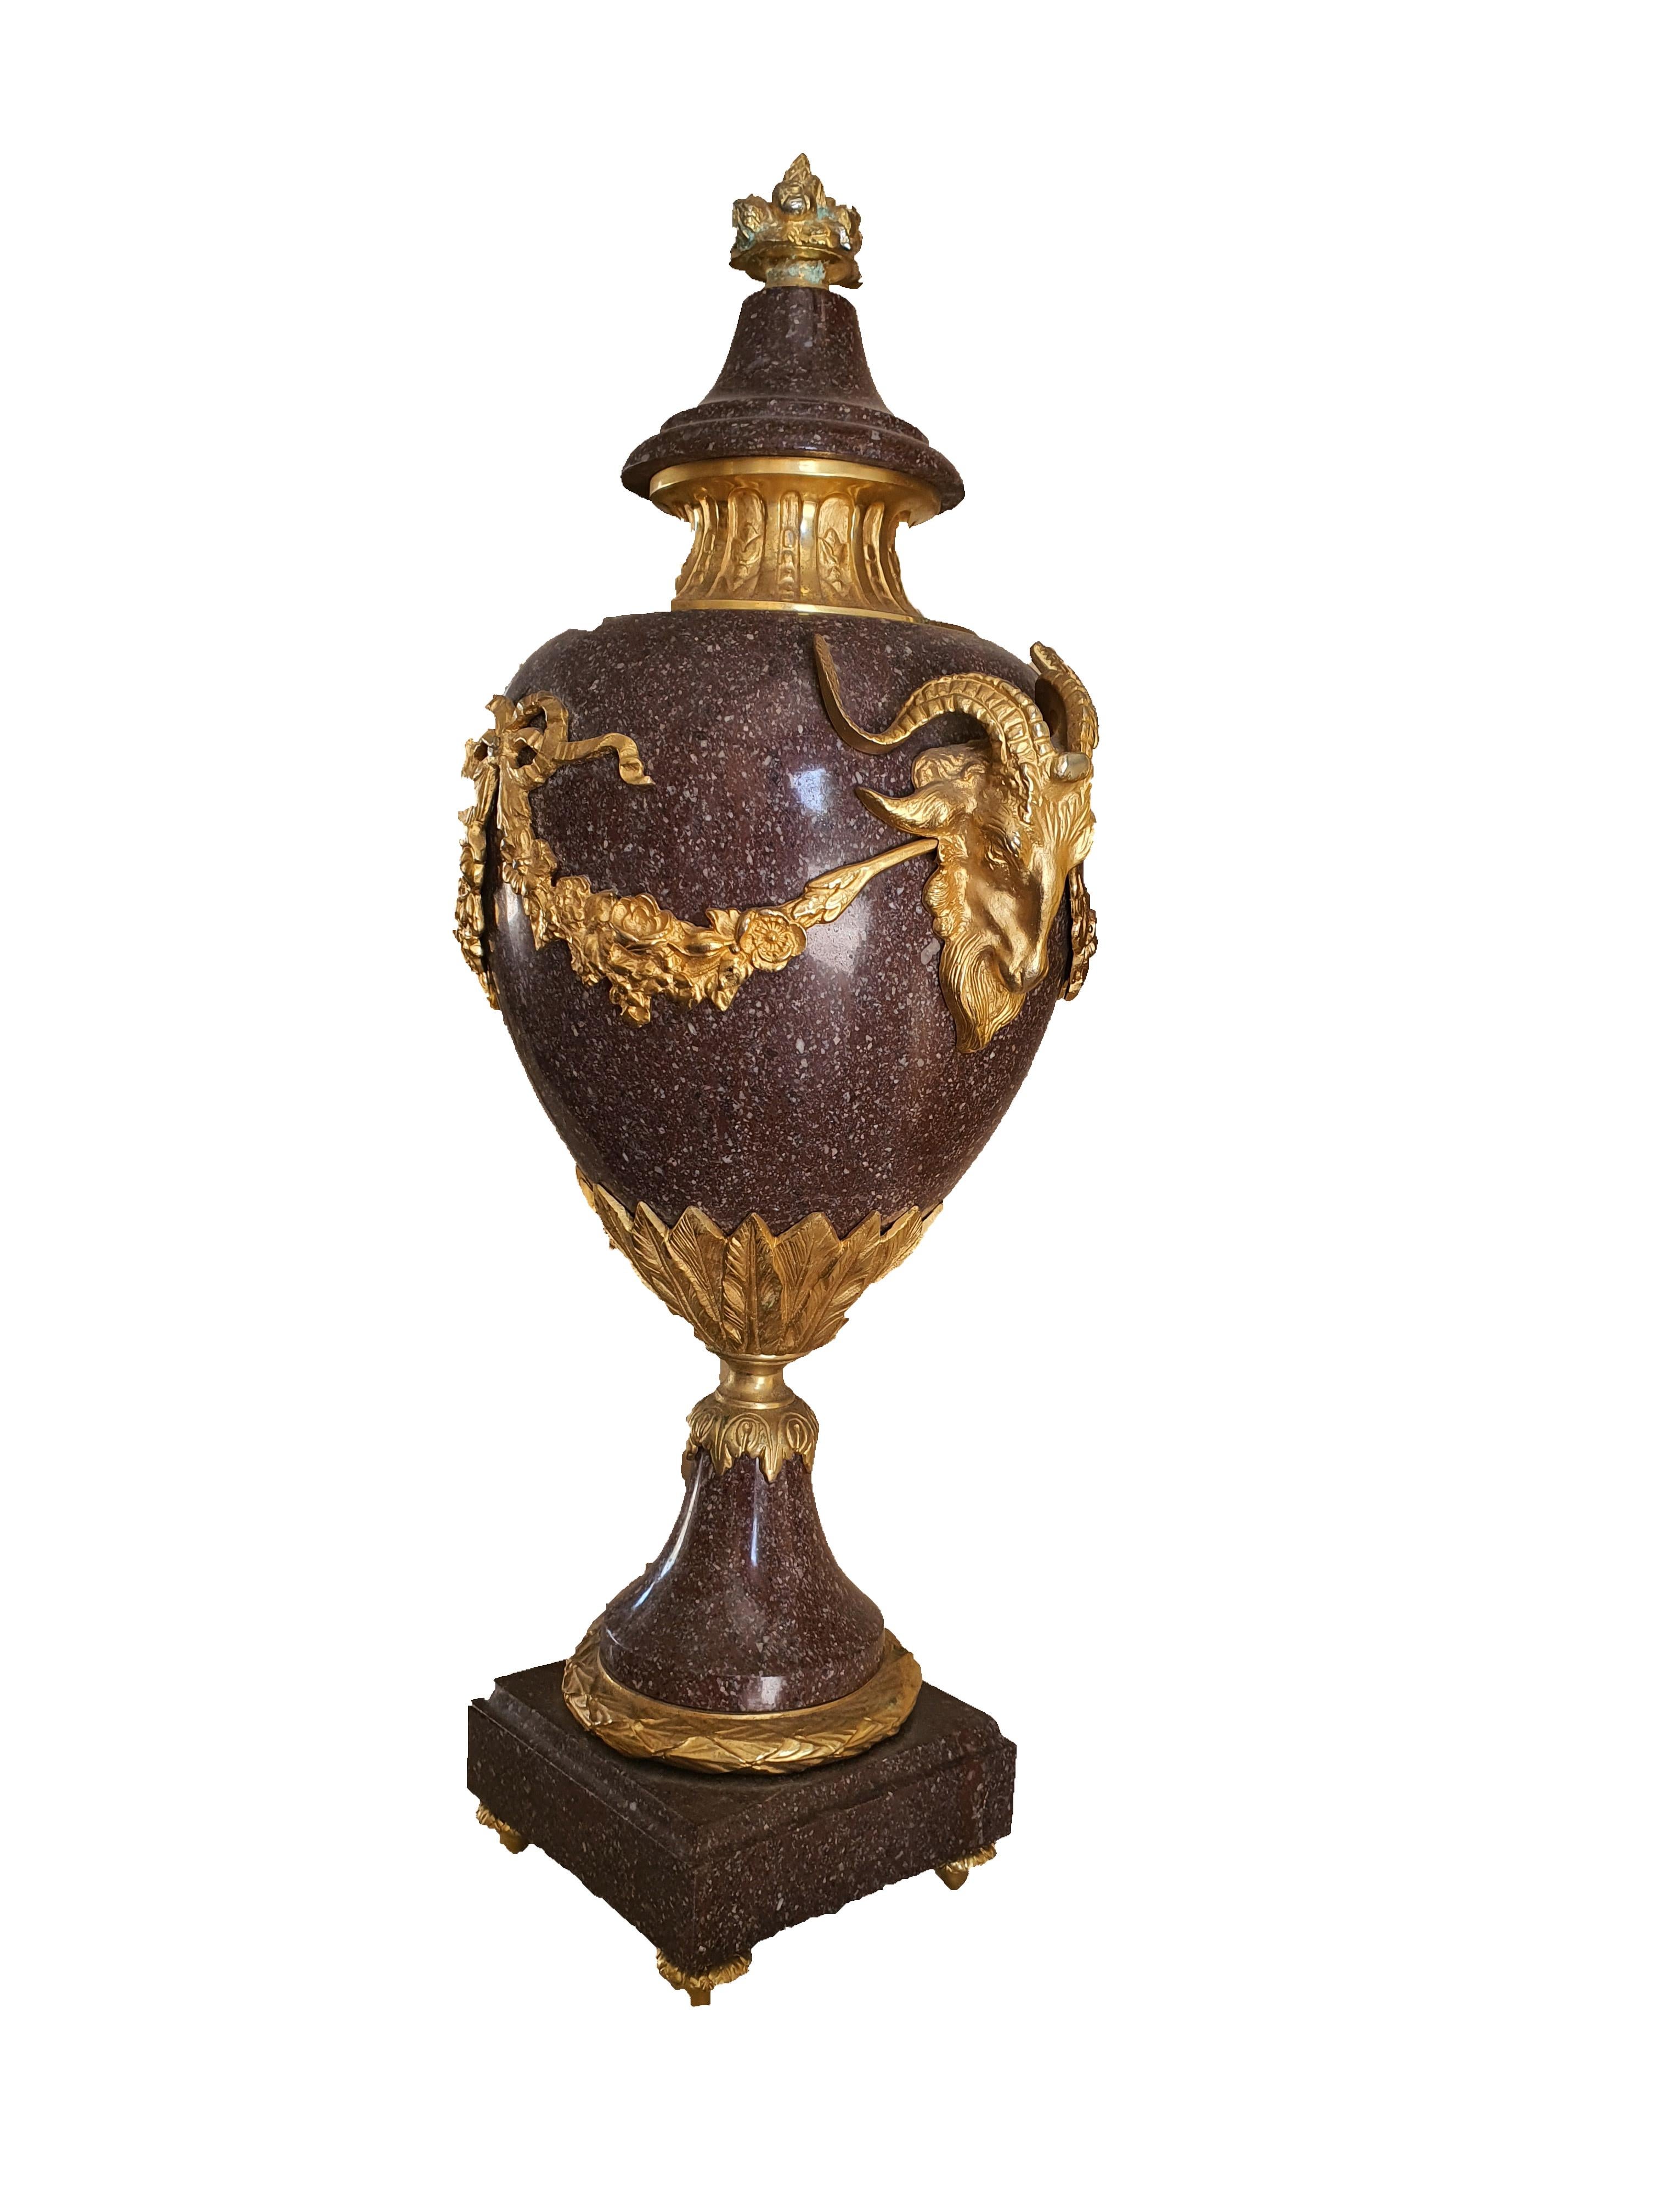 Elegant Italian vase in Egyptian porphyry adorned with precious applications in finely chiseled and gilded bronze. Goat heads in bronze on the sides, joined by a bronze wreath, finely chiseled, with a floral motif.